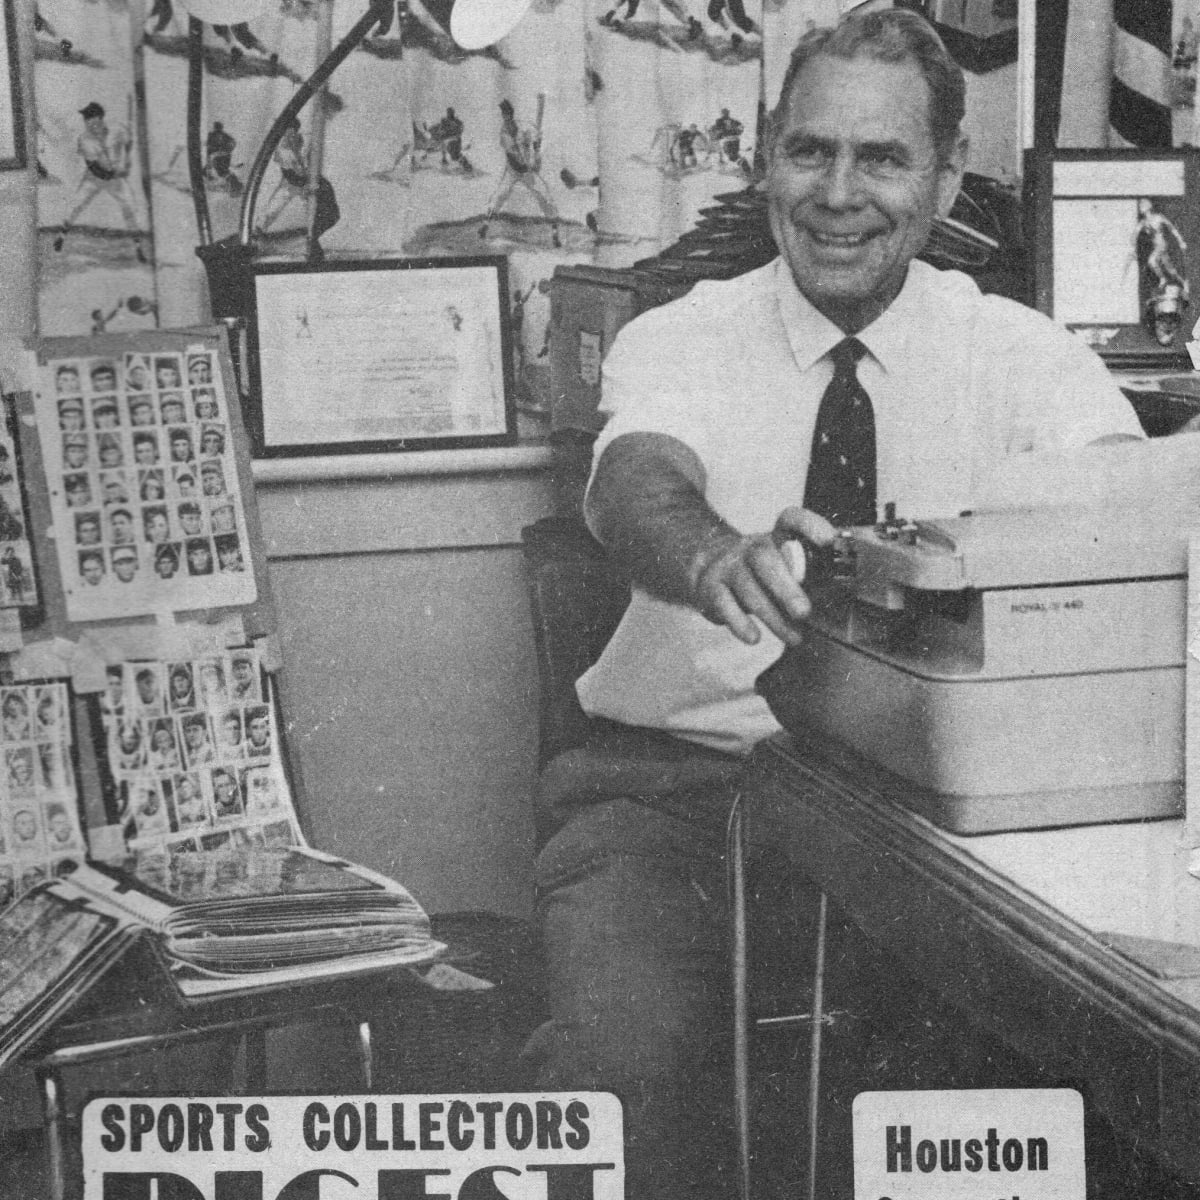 Baseball Card Collecting Was Life's Work for Jefferson Burdick - The New  York Times